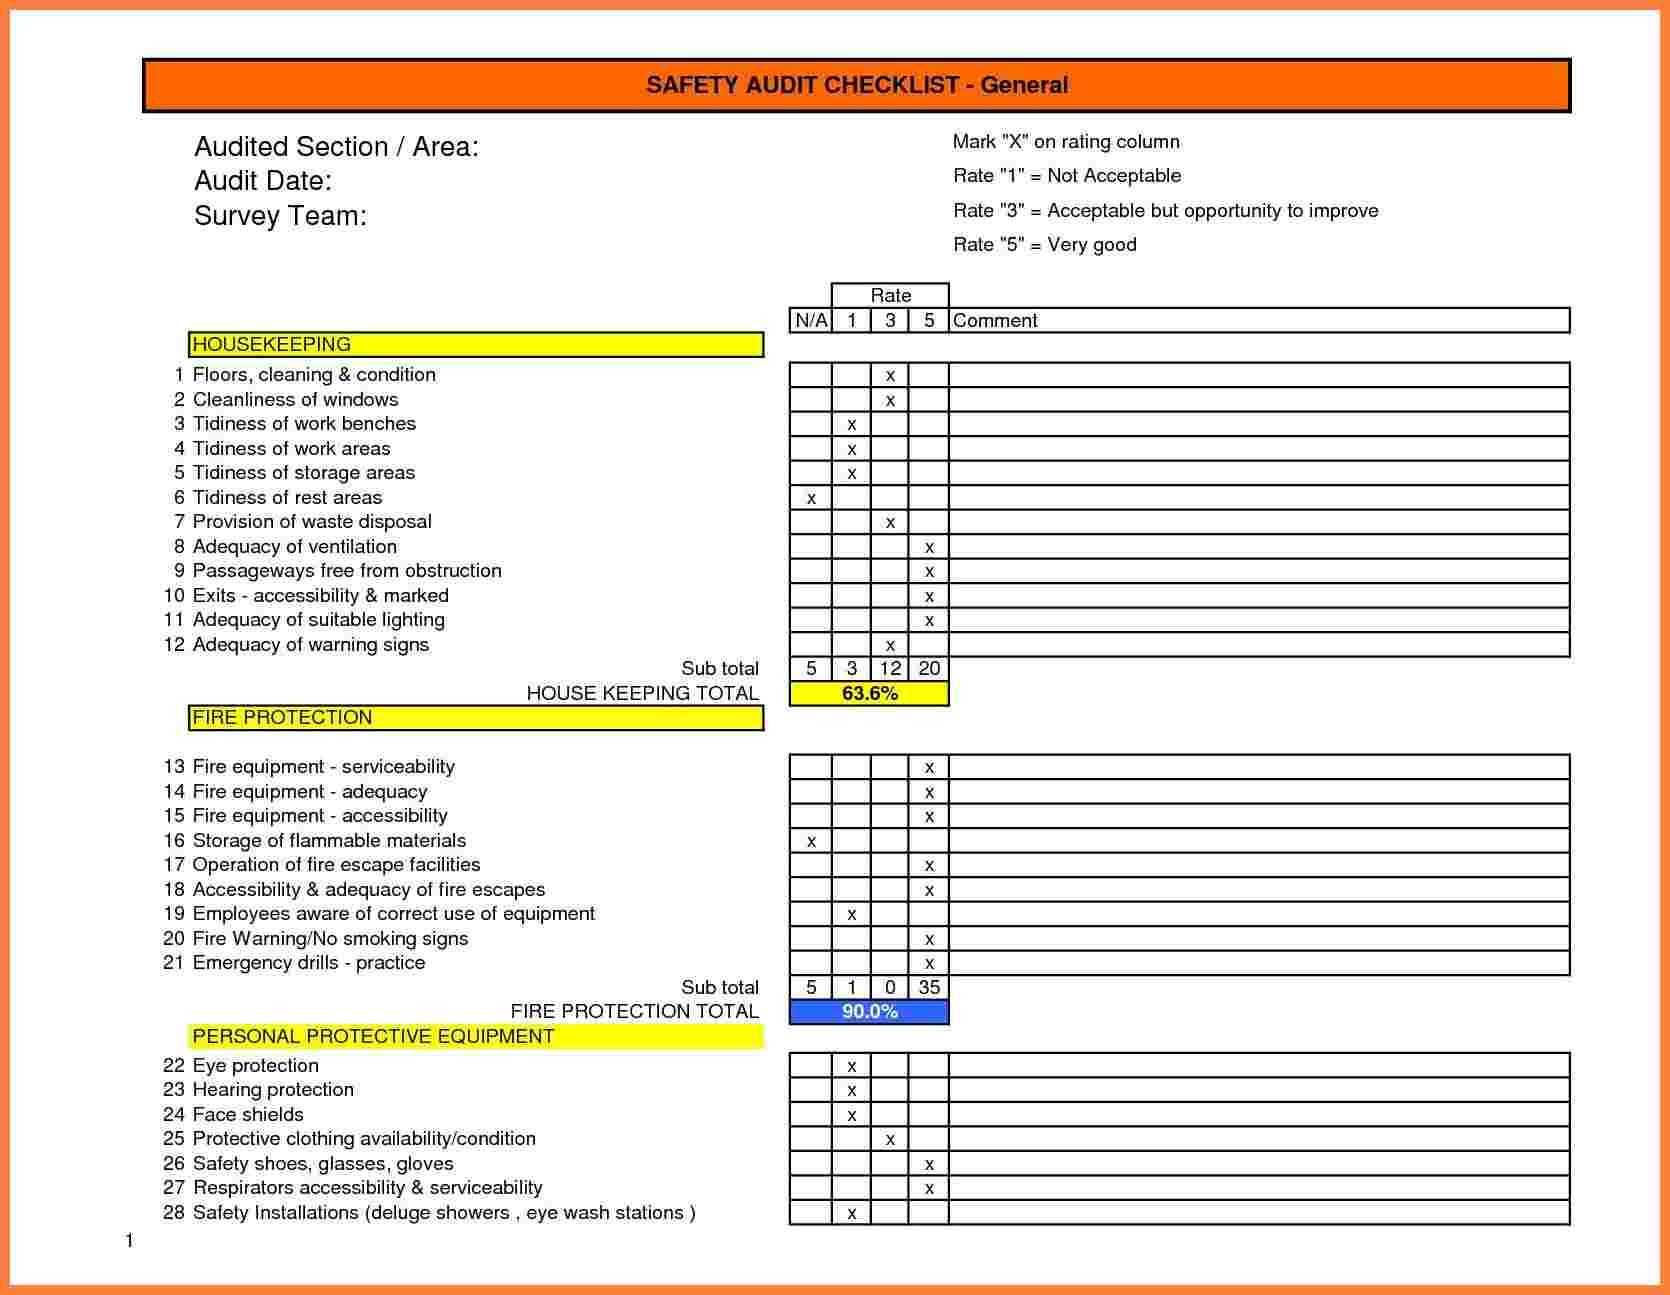 Image Result For Warehouse Health And Safety Audit Form In Safety Analysis Report Template